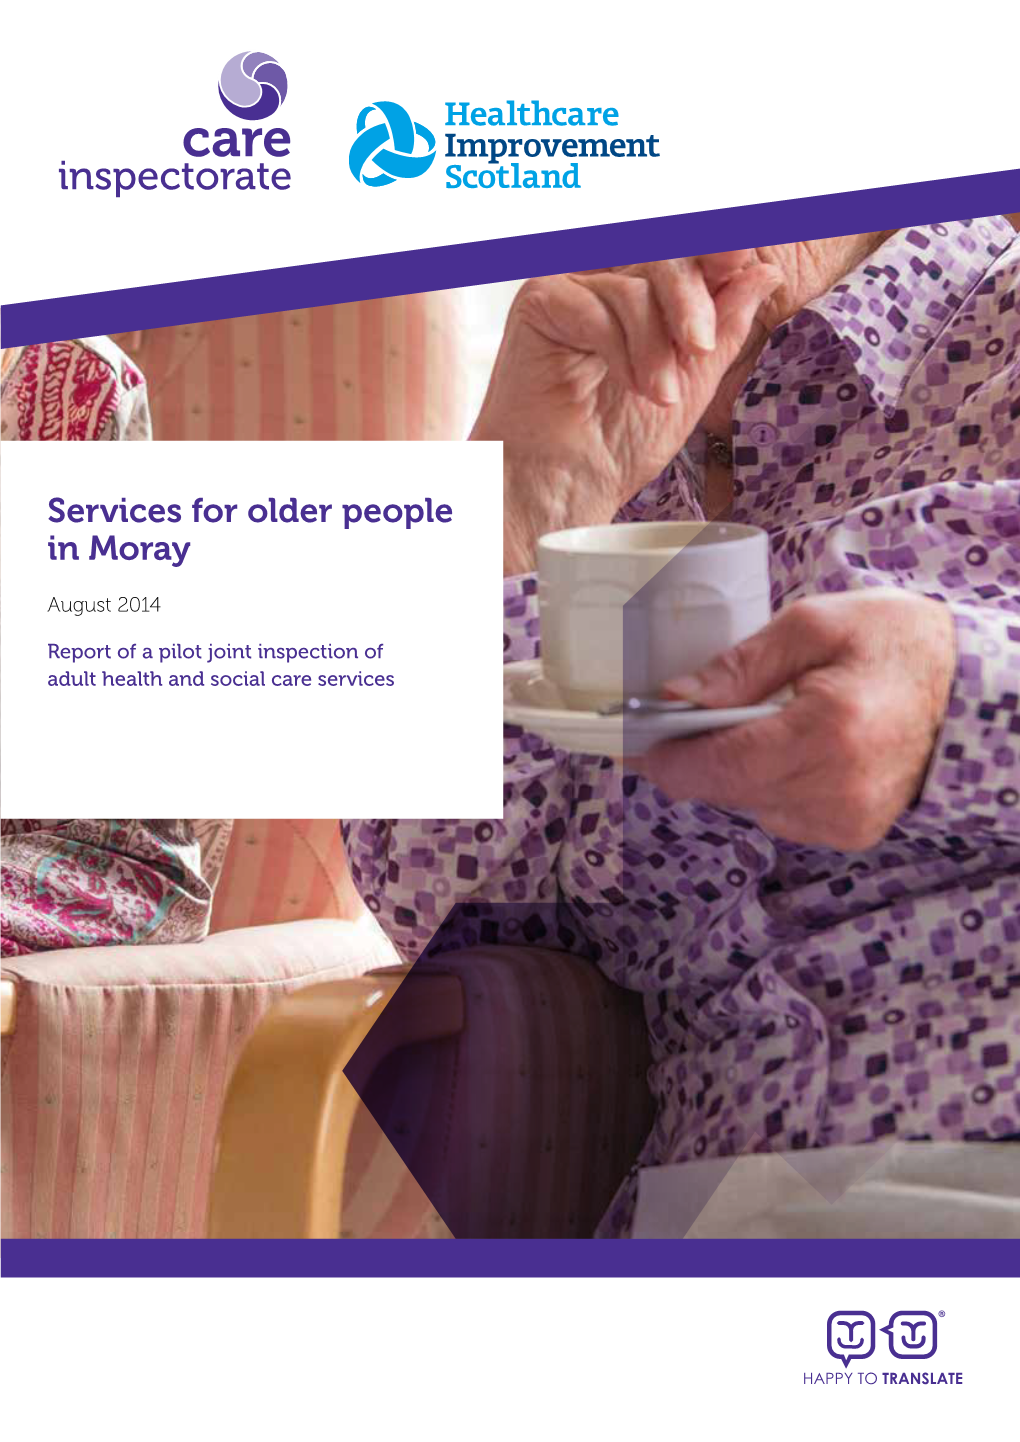 Services for Older People in Moray